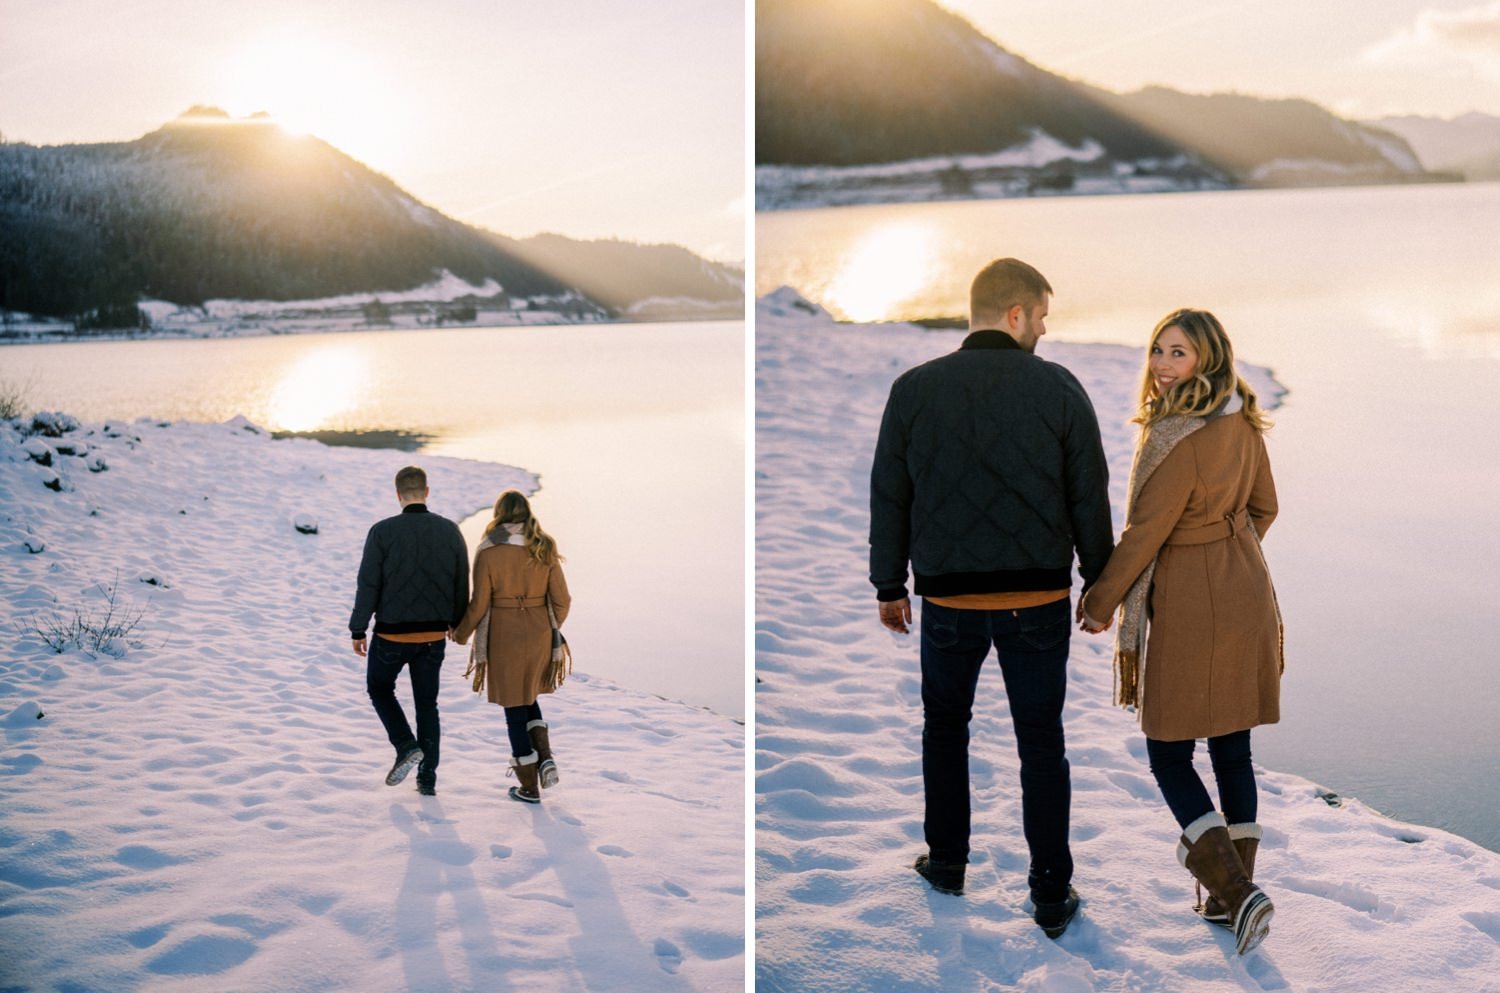 04_Snowy engagement photos at Snoqualmie Pass near Seattle, with a film-like style by Ryan Flynn Photography.jpg